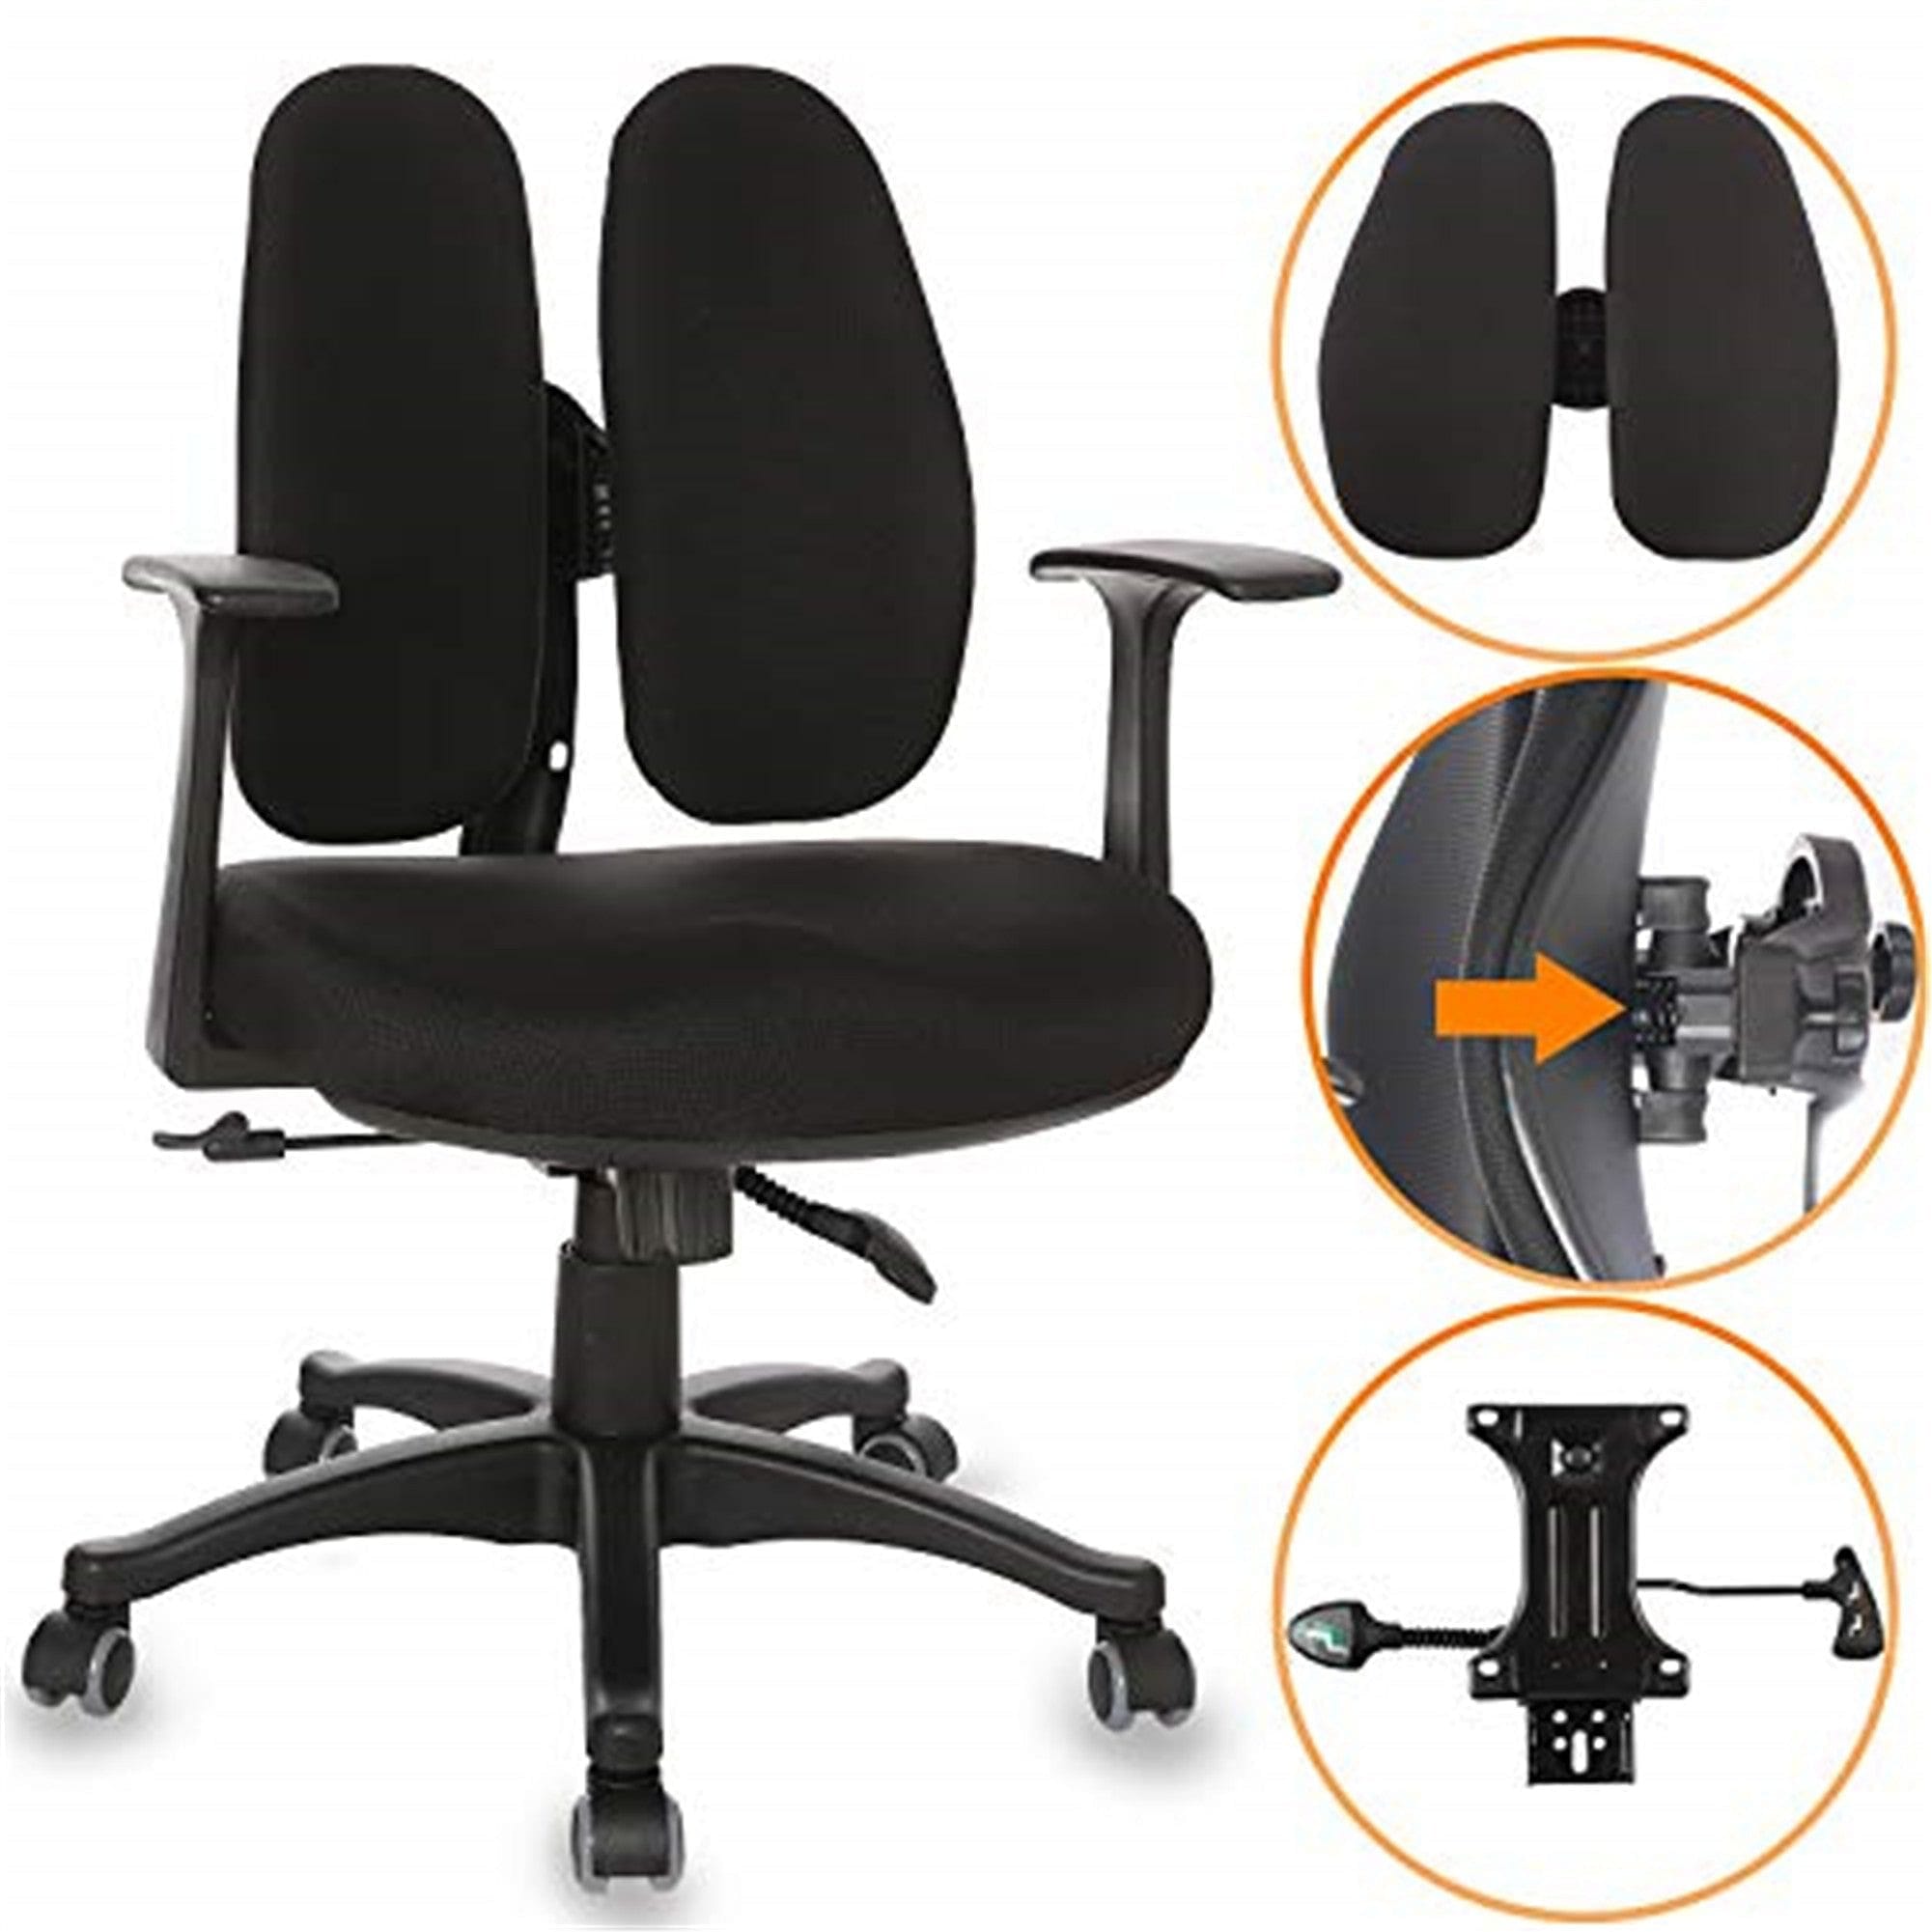 Ergonomic Office Chair Desk Computer High Back Swivel Chair Managerial Executive Chair with Adjustable Lumbar Support